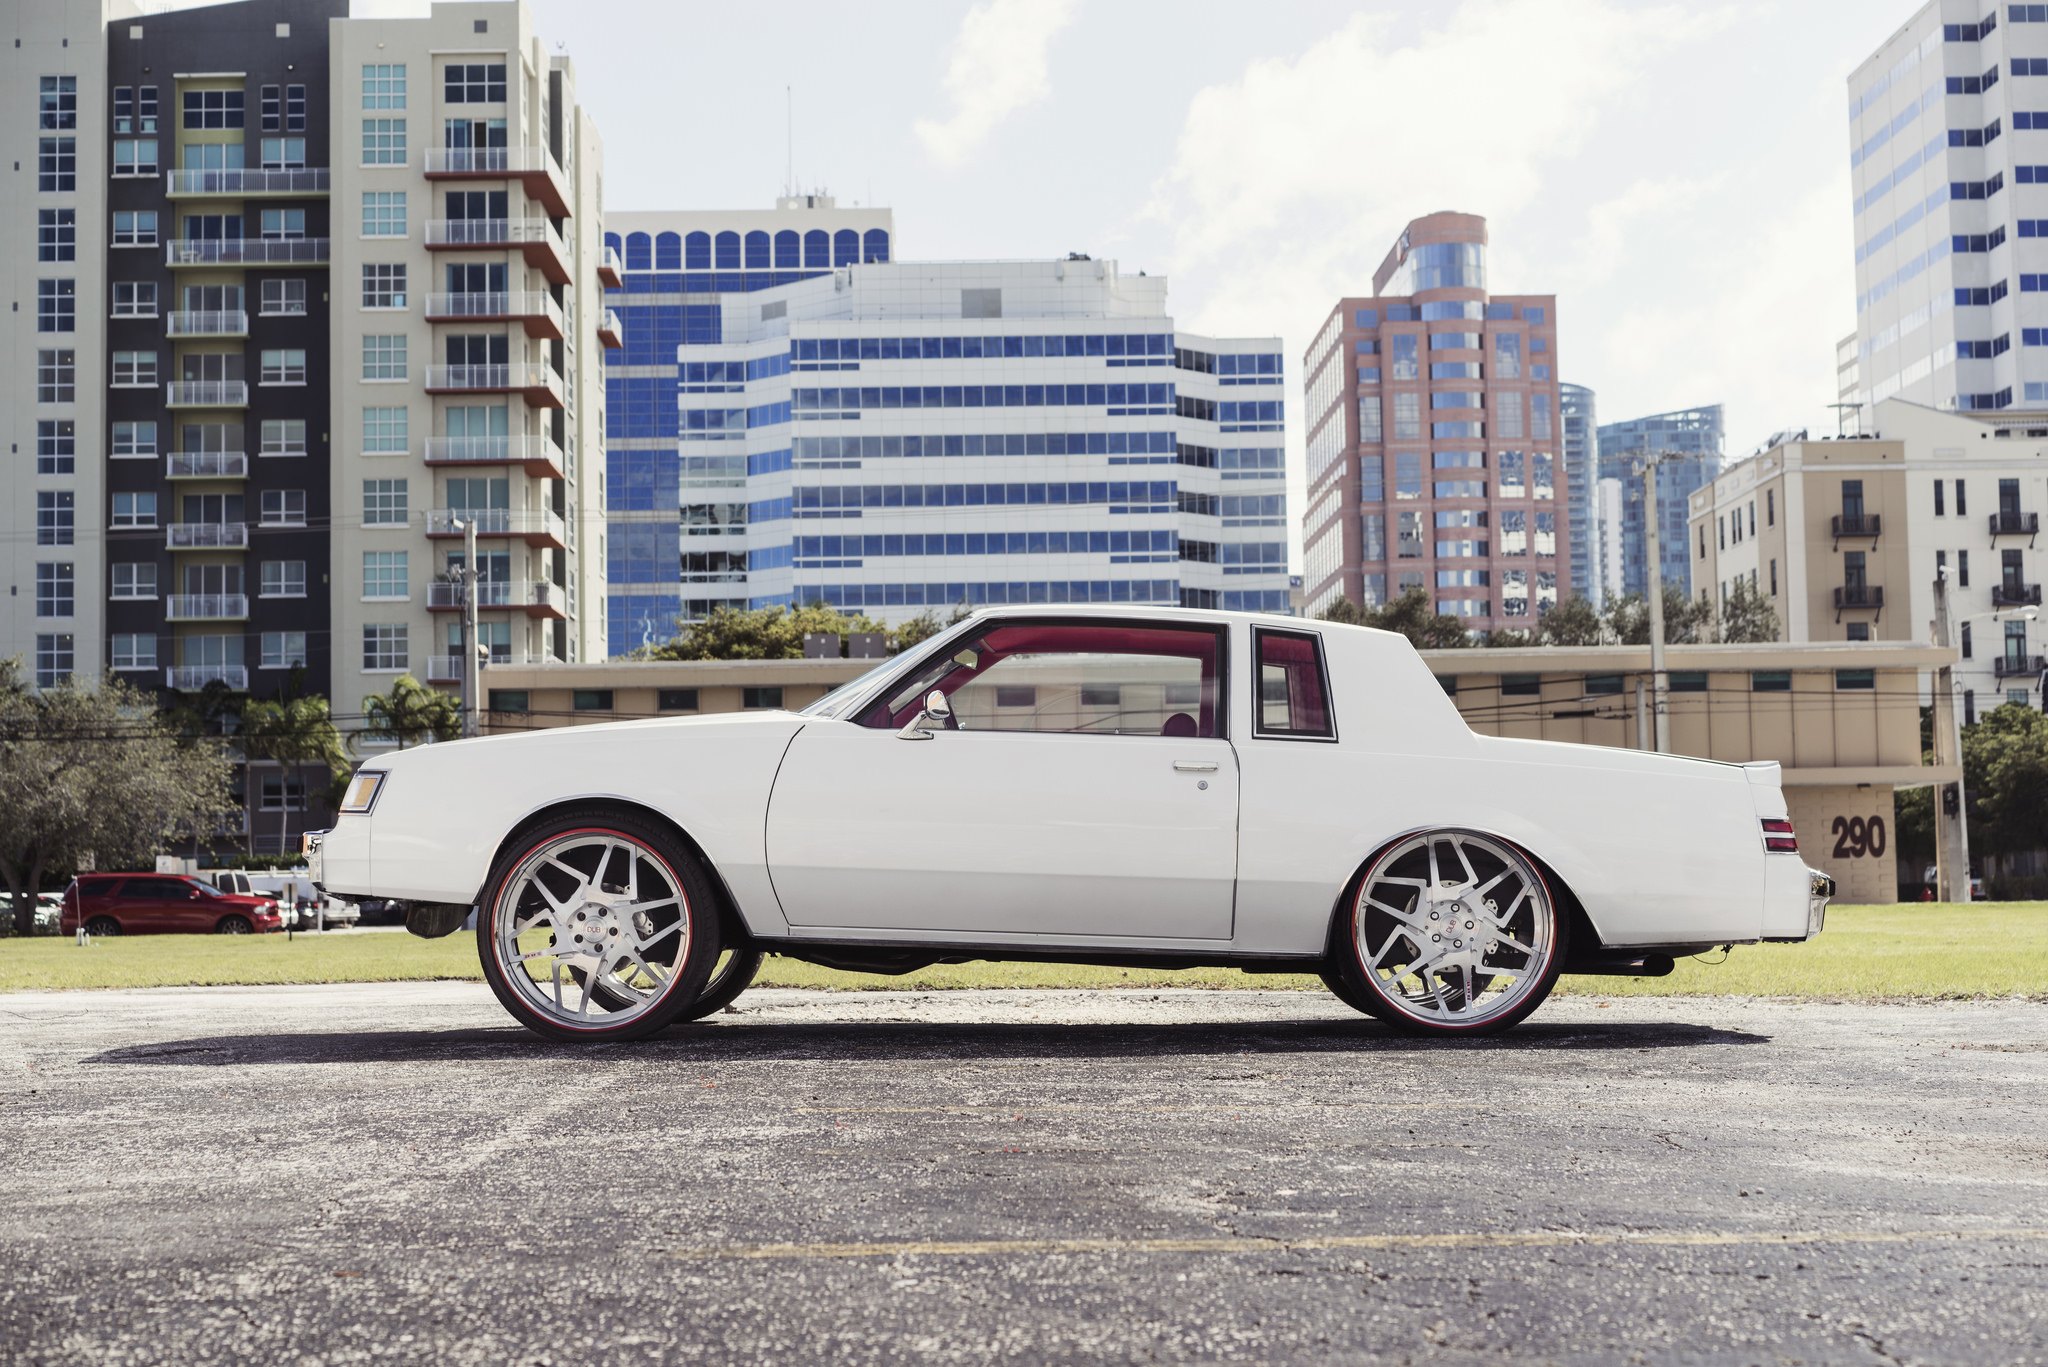 Whiite Lifted Buick Regal on 24 Inch DUB Wheels - Photo by DUB